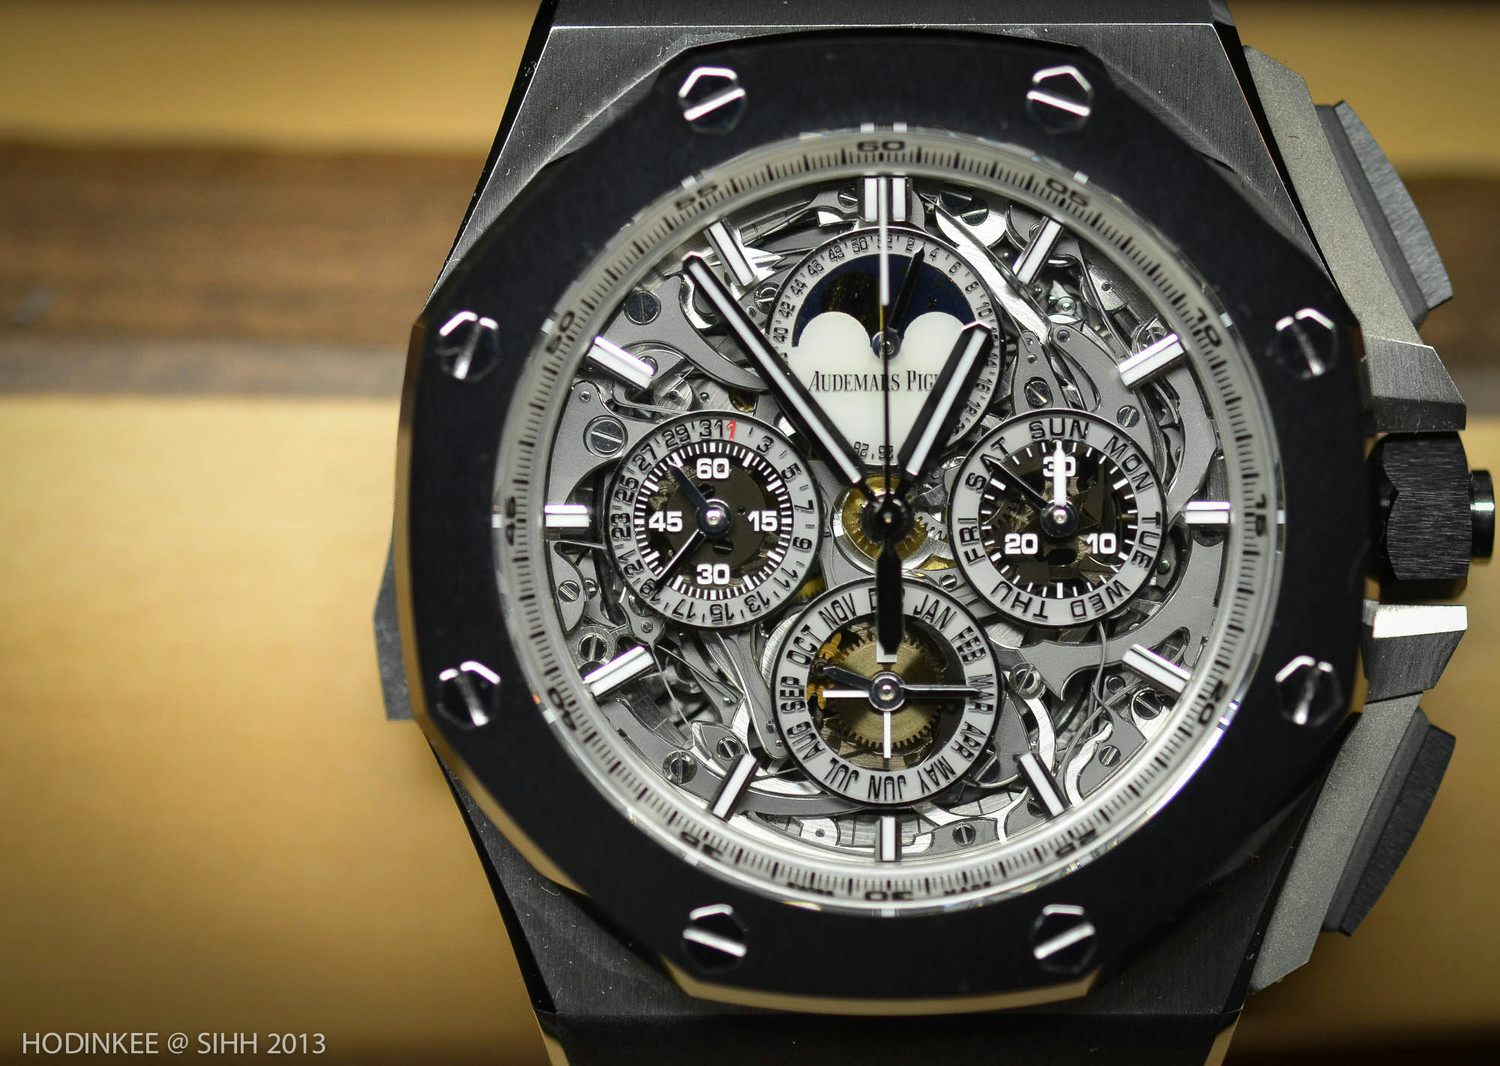 In-Depth: Hands-On With The Audemars Piguet Royal Oak Offshore Grand  Complication In Titanium And Ceramic (Live Photos, Video, & Pricing) -  HODINKEE